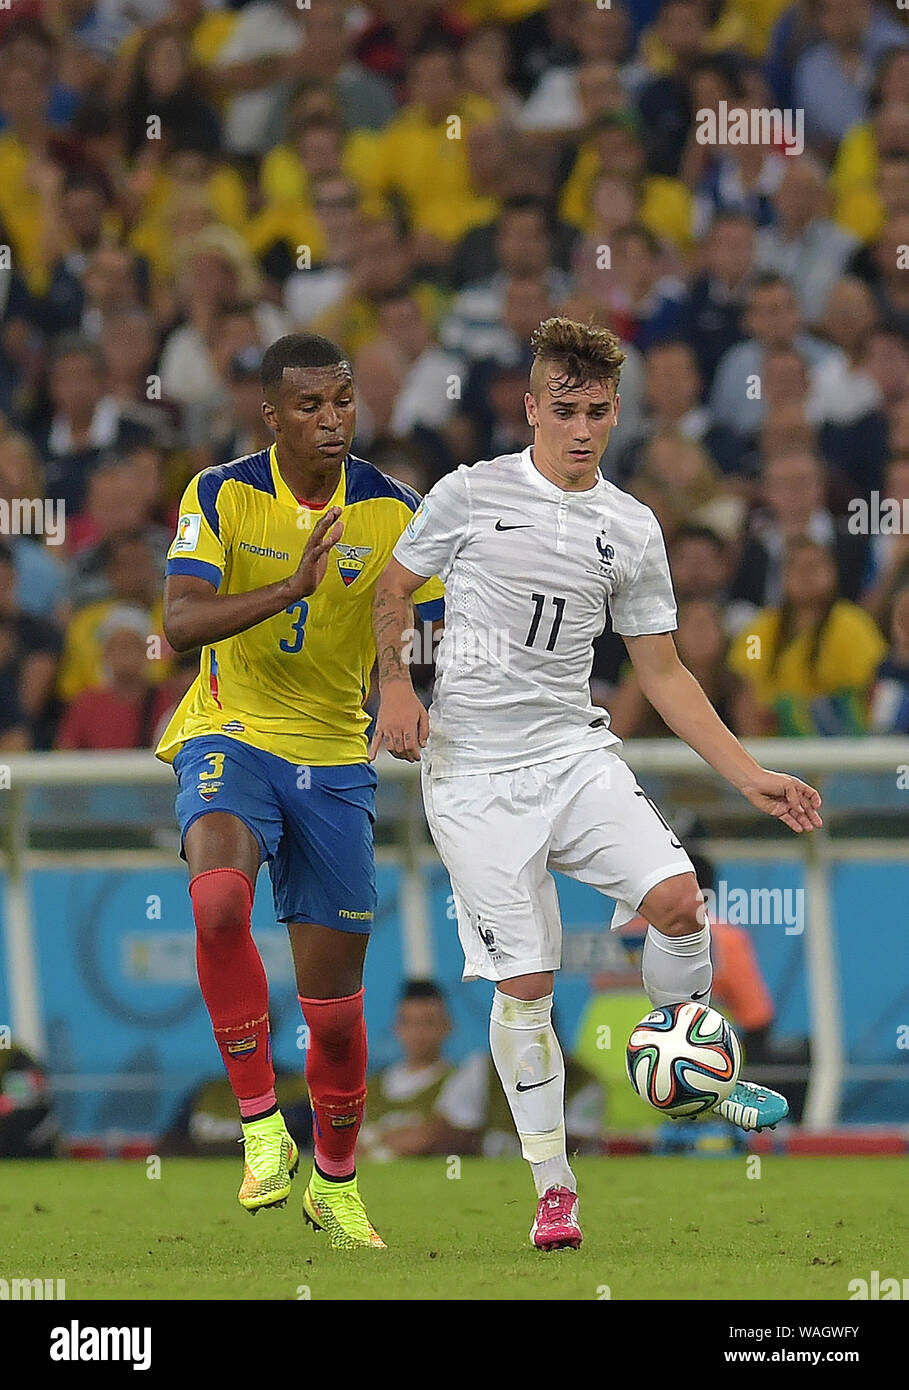 Rio de Janeiro, June 25, 2014. Football player Griezmann, during the Ecuador-France football match for the 2014 World Cup at the Maracanã Stadium in R Stock Photo